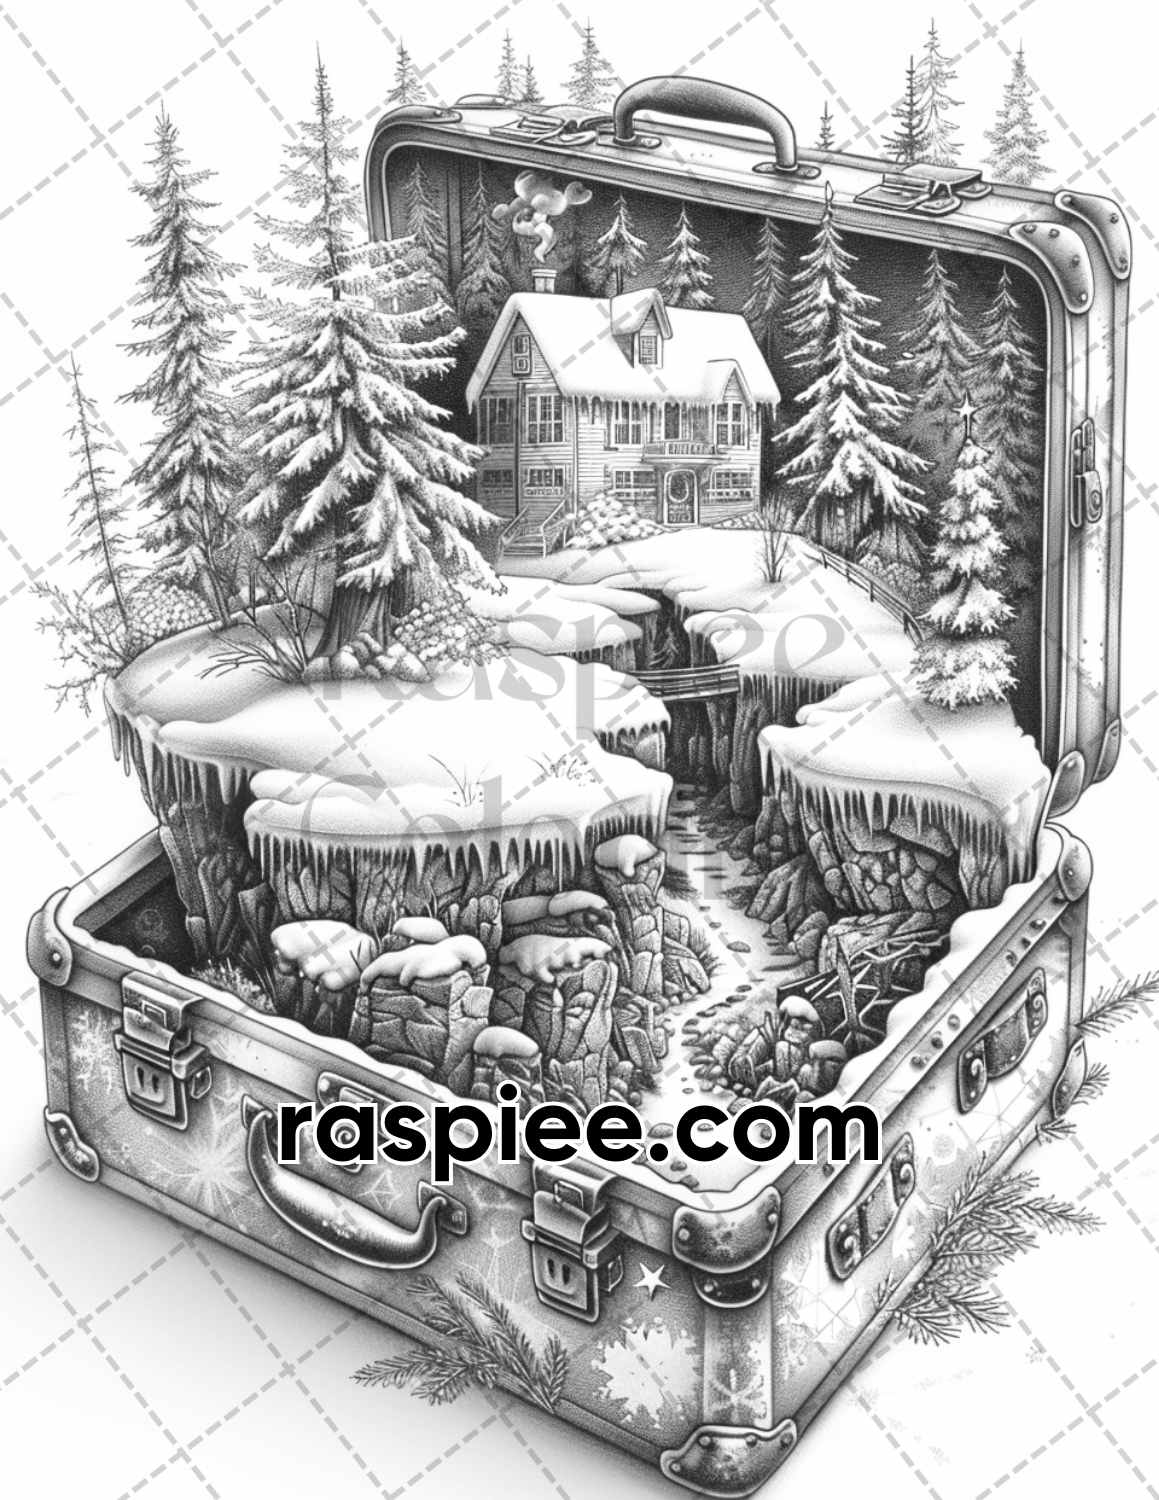 adult coloring pages, adult coloring sheets, adult coloring book pdf, adult coloring book printable, grayscale coloring pages, grayscale coloring books, fanasty coloring pages for adults, fantasy coloring book, grayscale illustration, Worlds in a Suitcase Grayscale Adult Coloring Pages